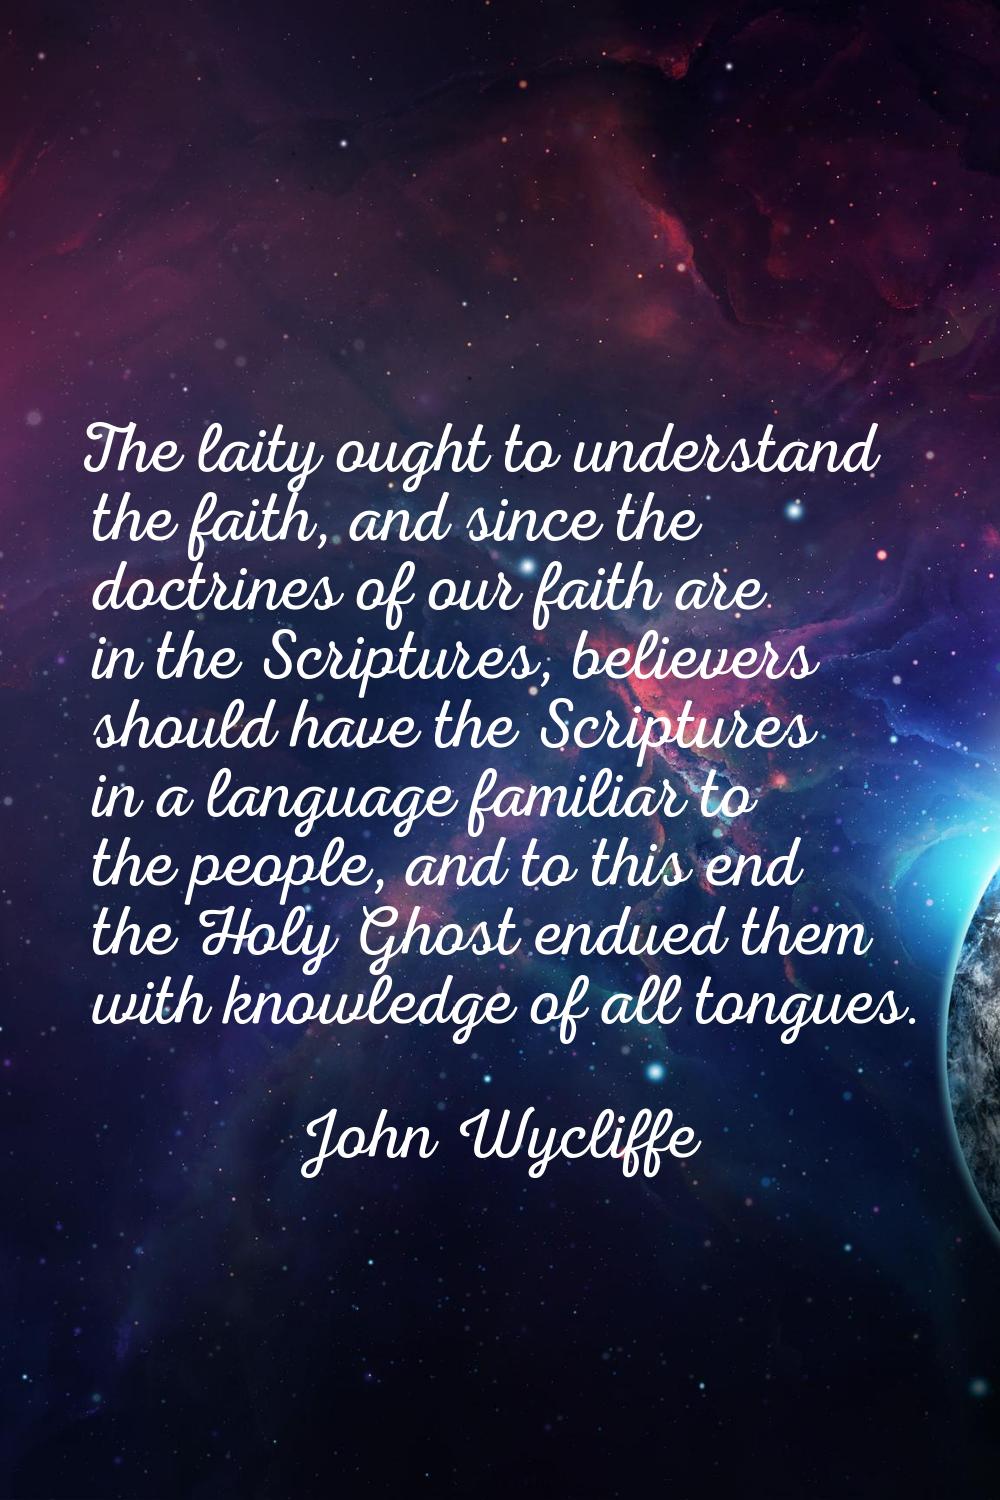 The laity ought to understand the faith, and since the doctrines of our faith are in the Scriptures